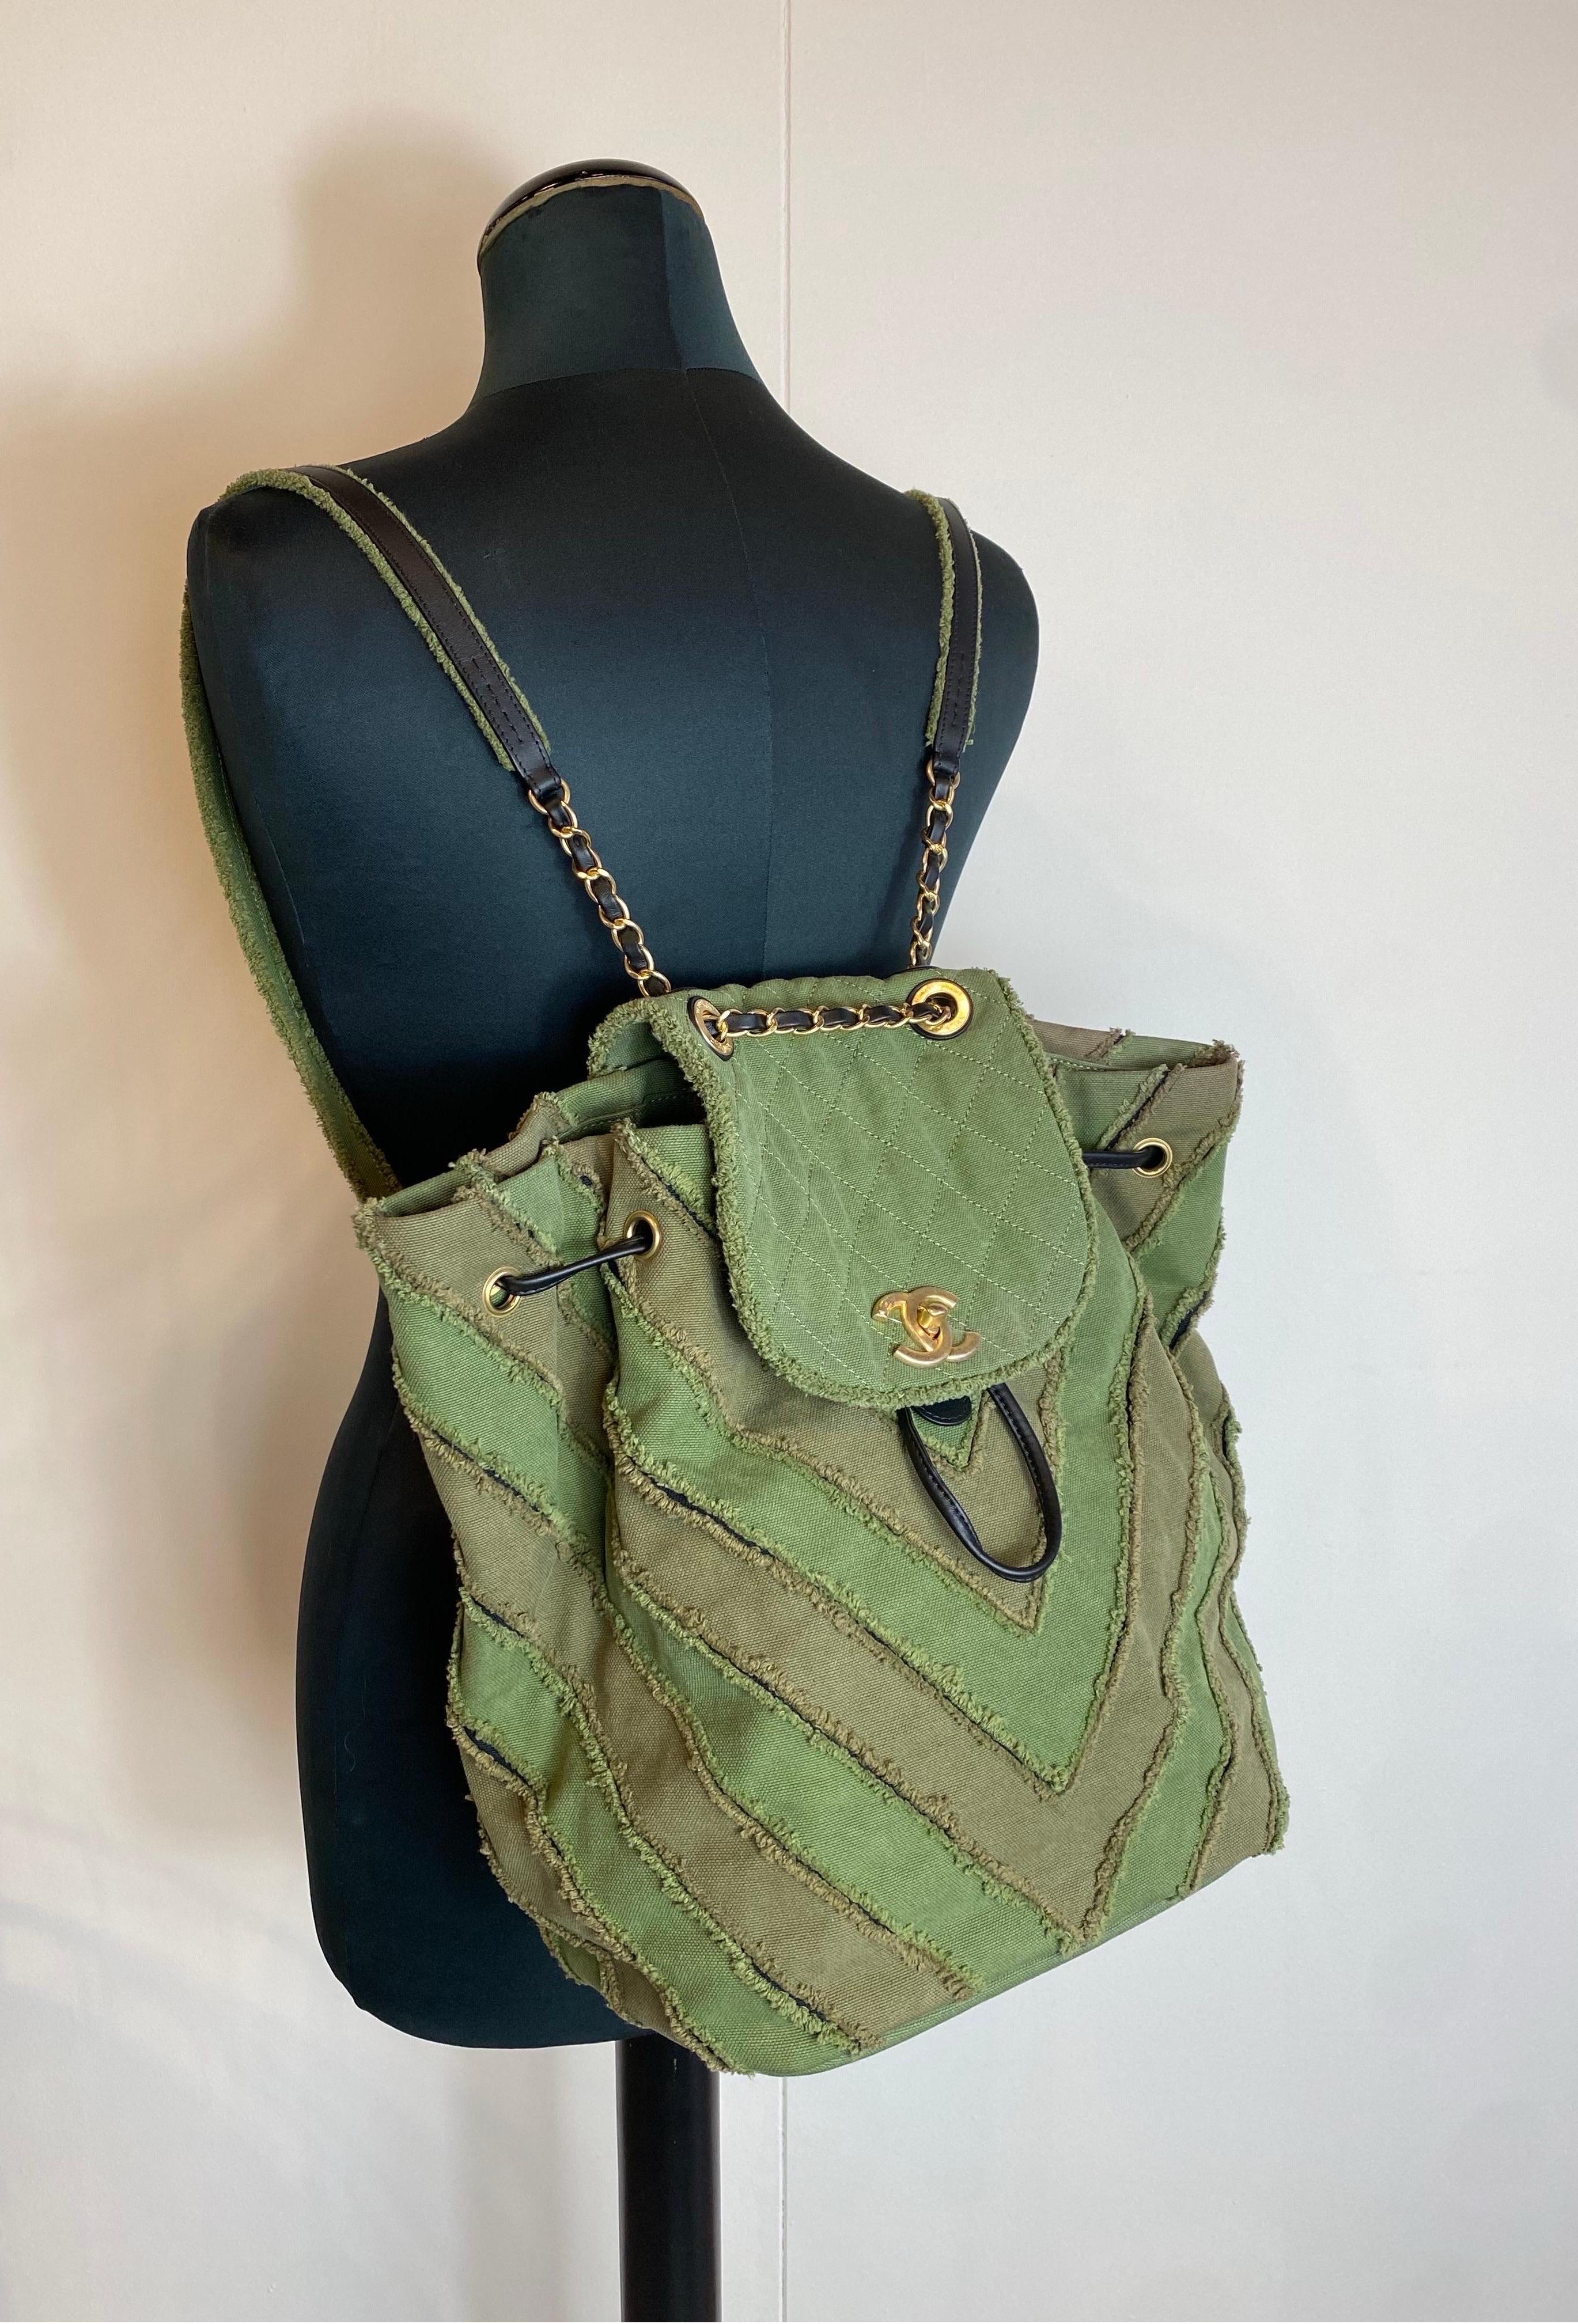 Chanel Cruise 2017 green Cuba Backpack In Excellent Condition For Sale In Carnate, IT